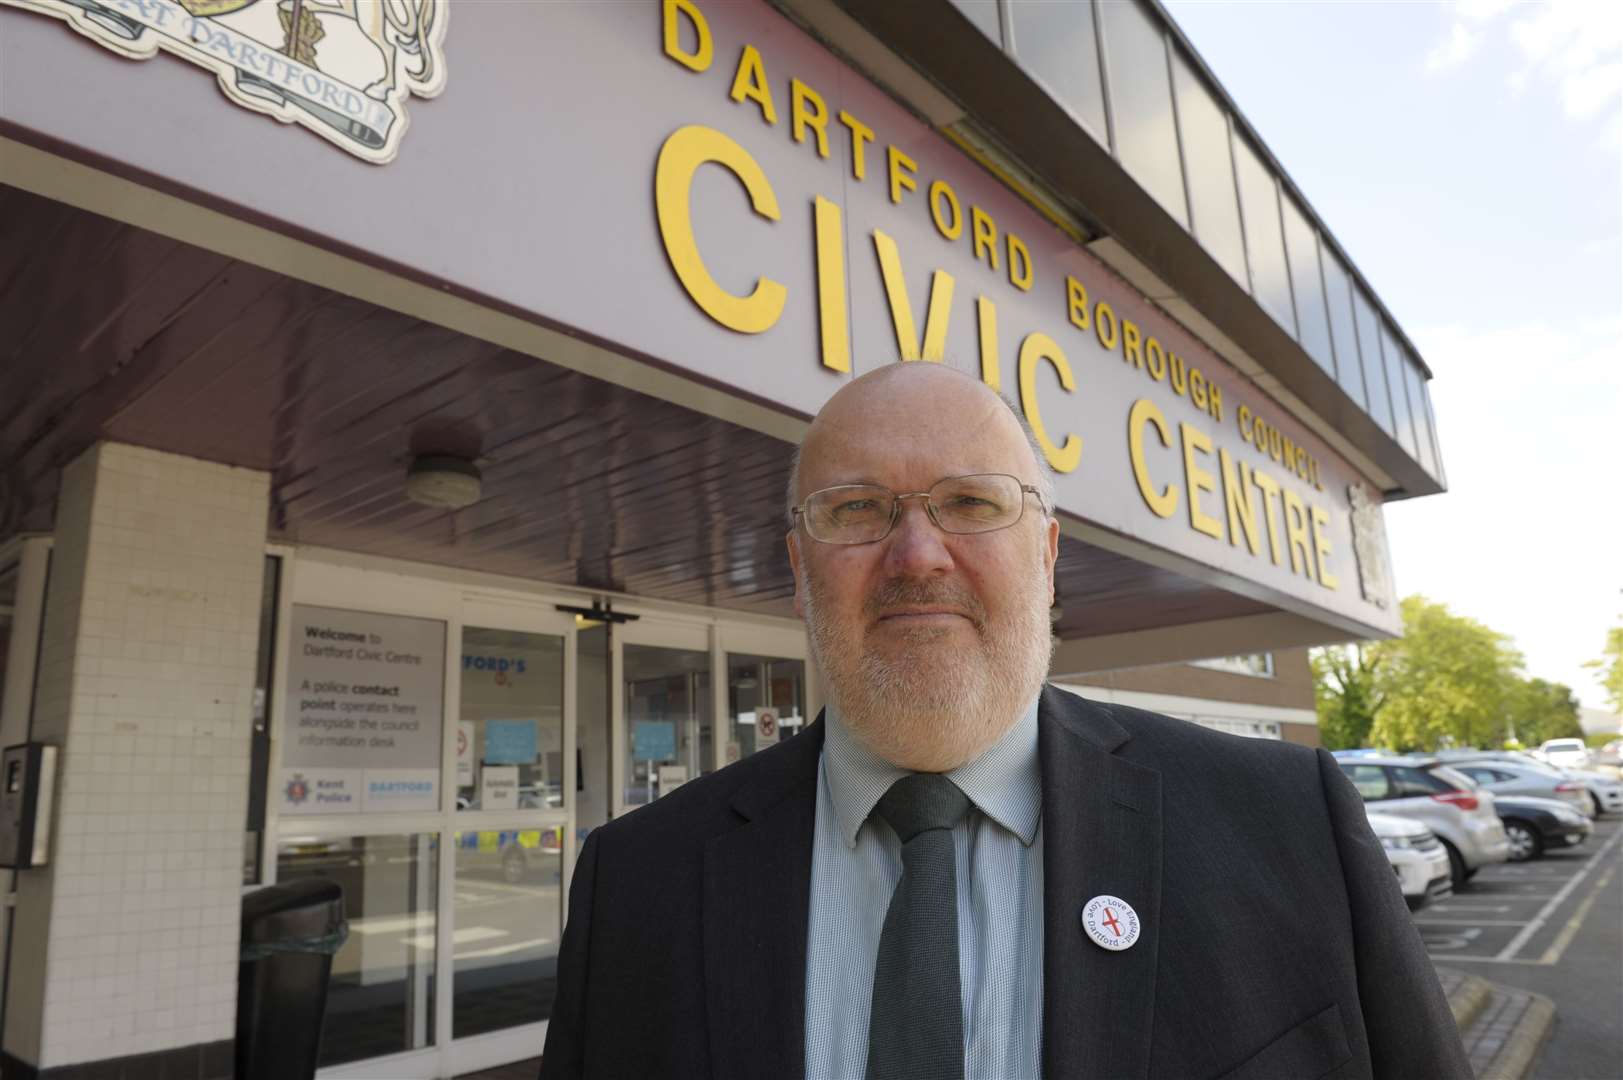 Dartford Council leader Jeremy Kite says the authority is in a good position financially despite the projected losses Picture: Steve Crispe